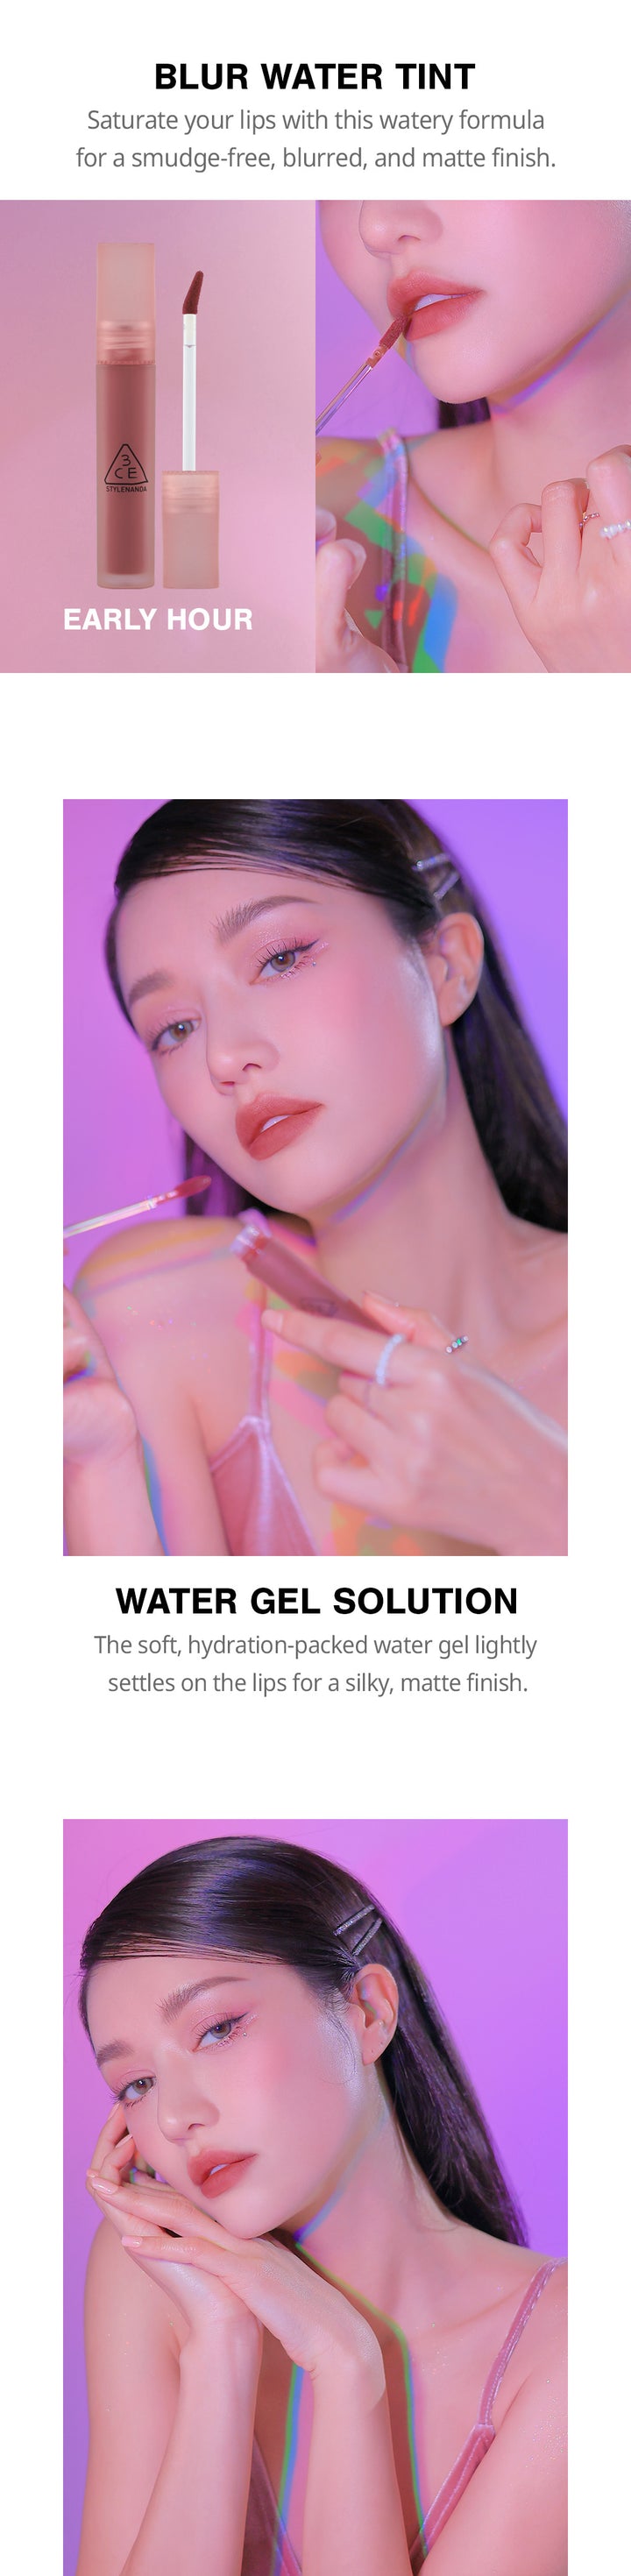 3CE Blur Water Tint #Early Hour